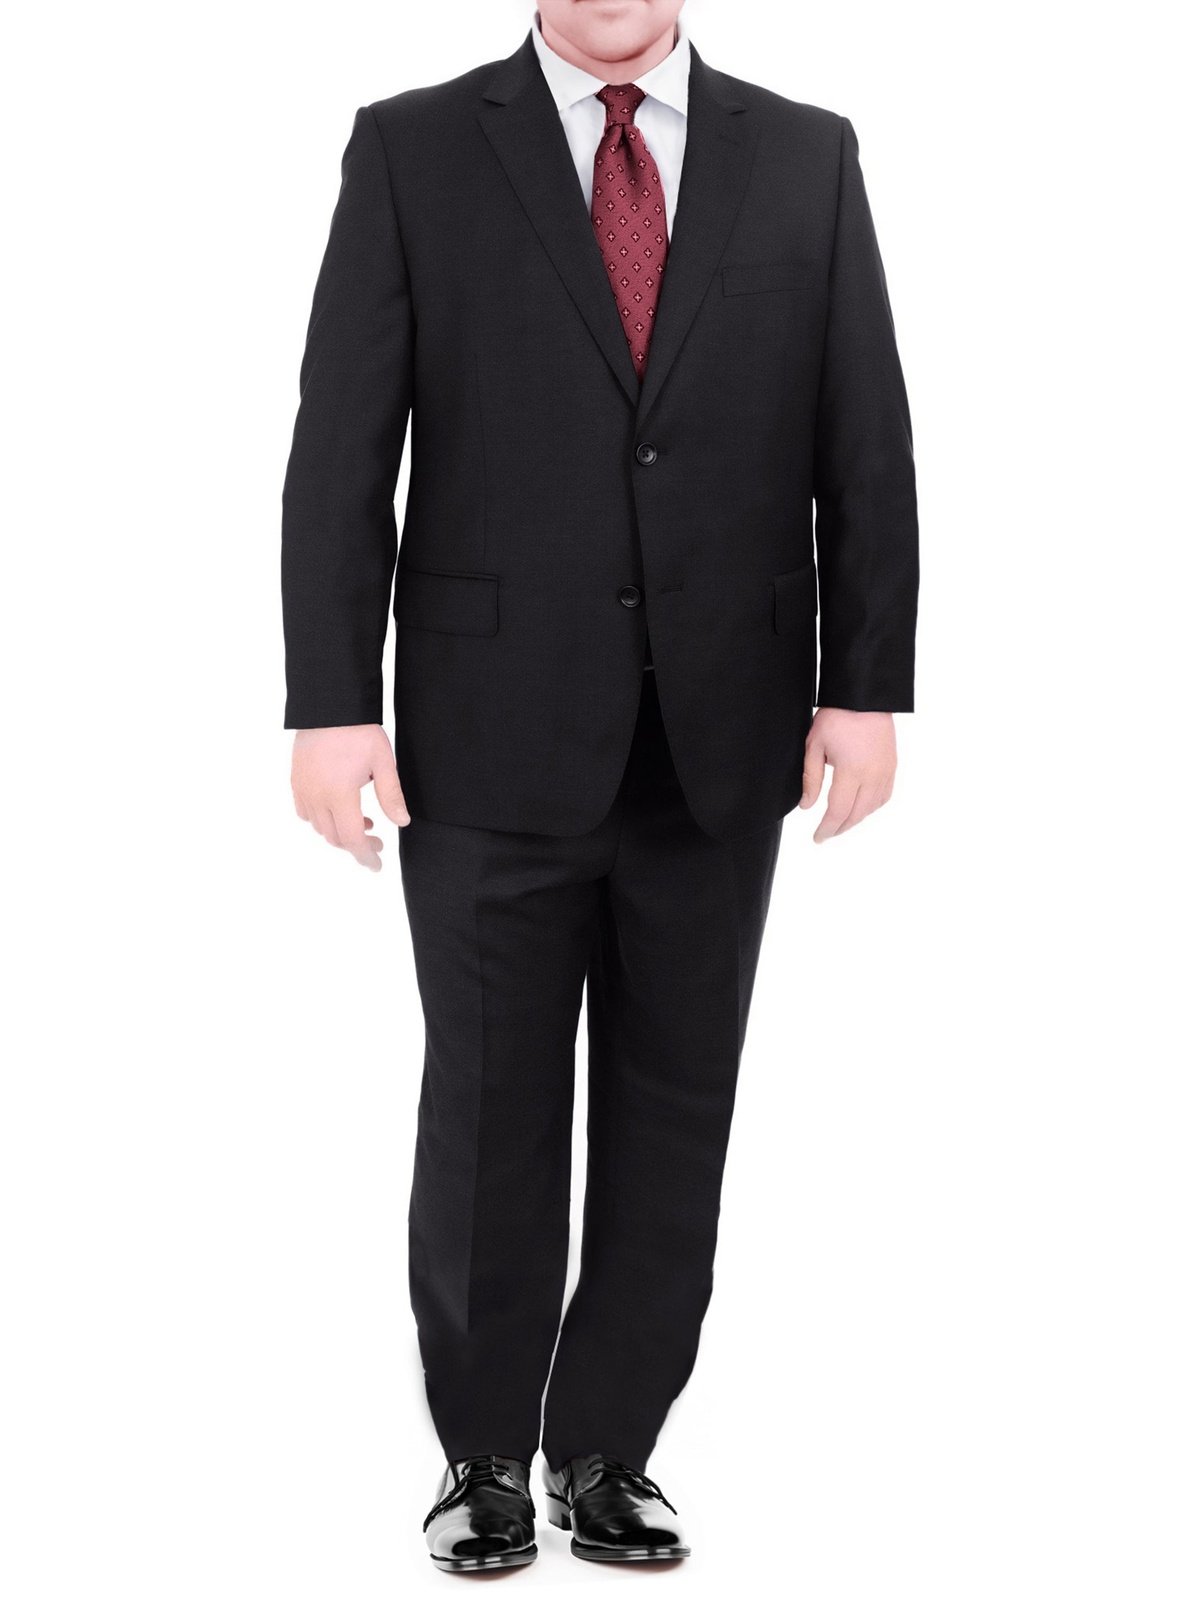 Men's Mazara Portly Fit Executive Cut Black Two Button Wool Suit